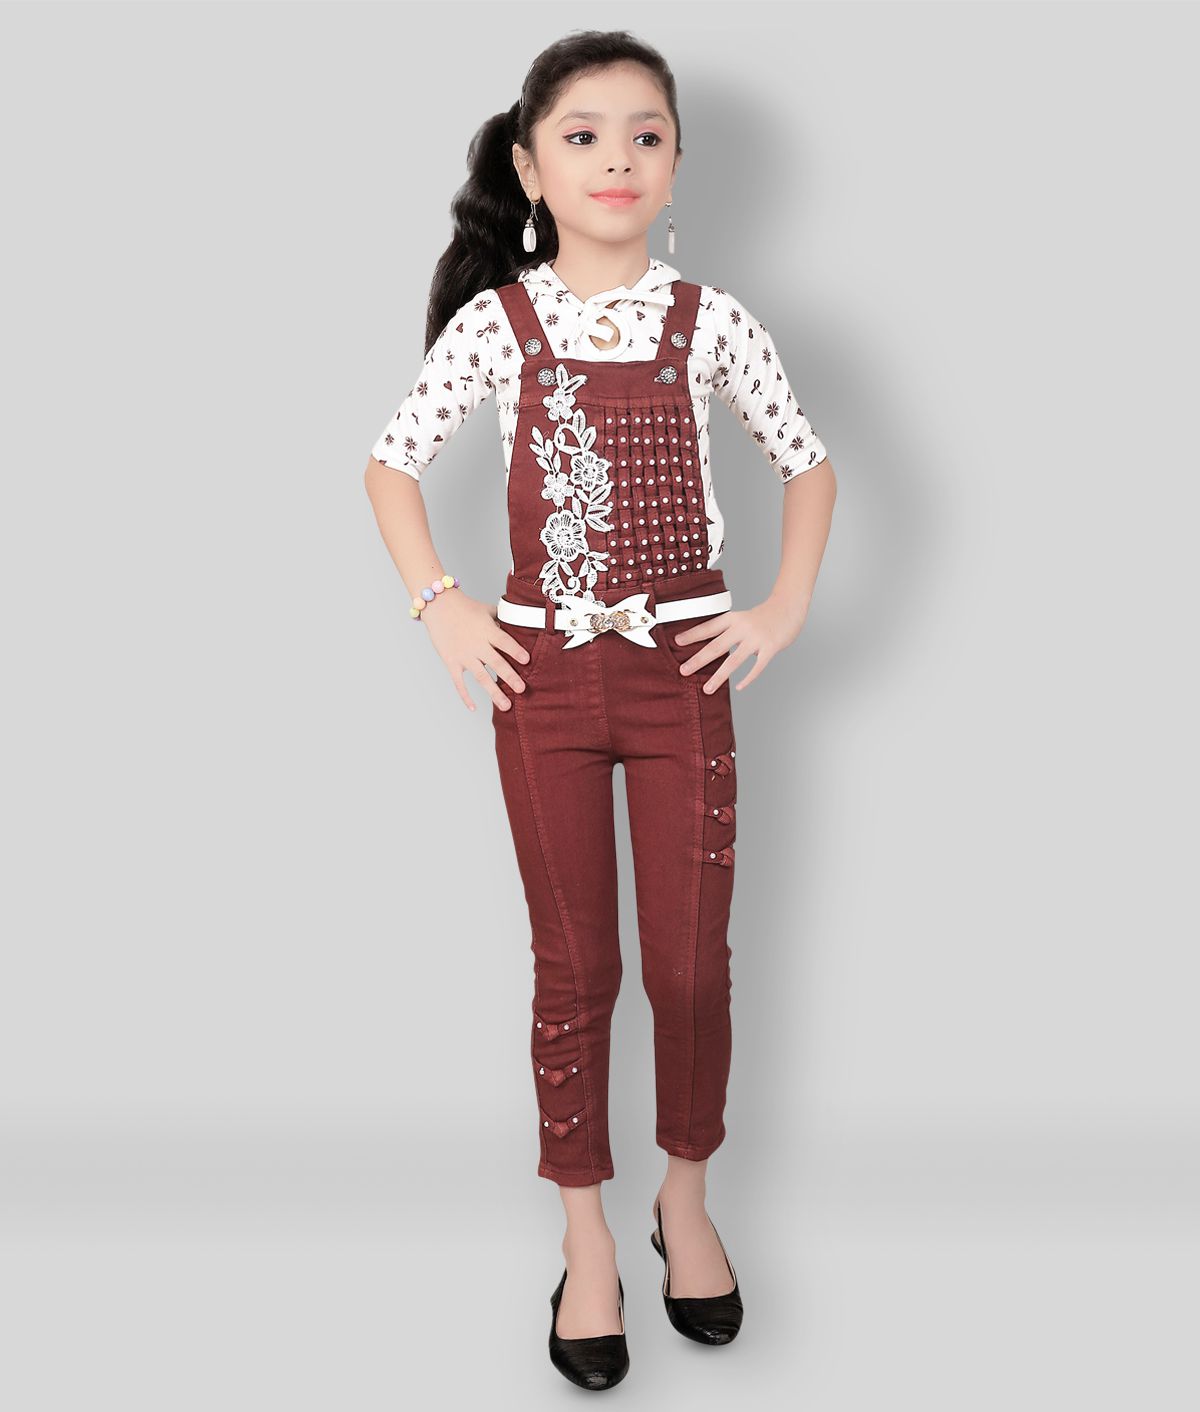     			Arshia Fashions - Maroon Denim Girl's Top With Dungarees ( Pack of 1 )